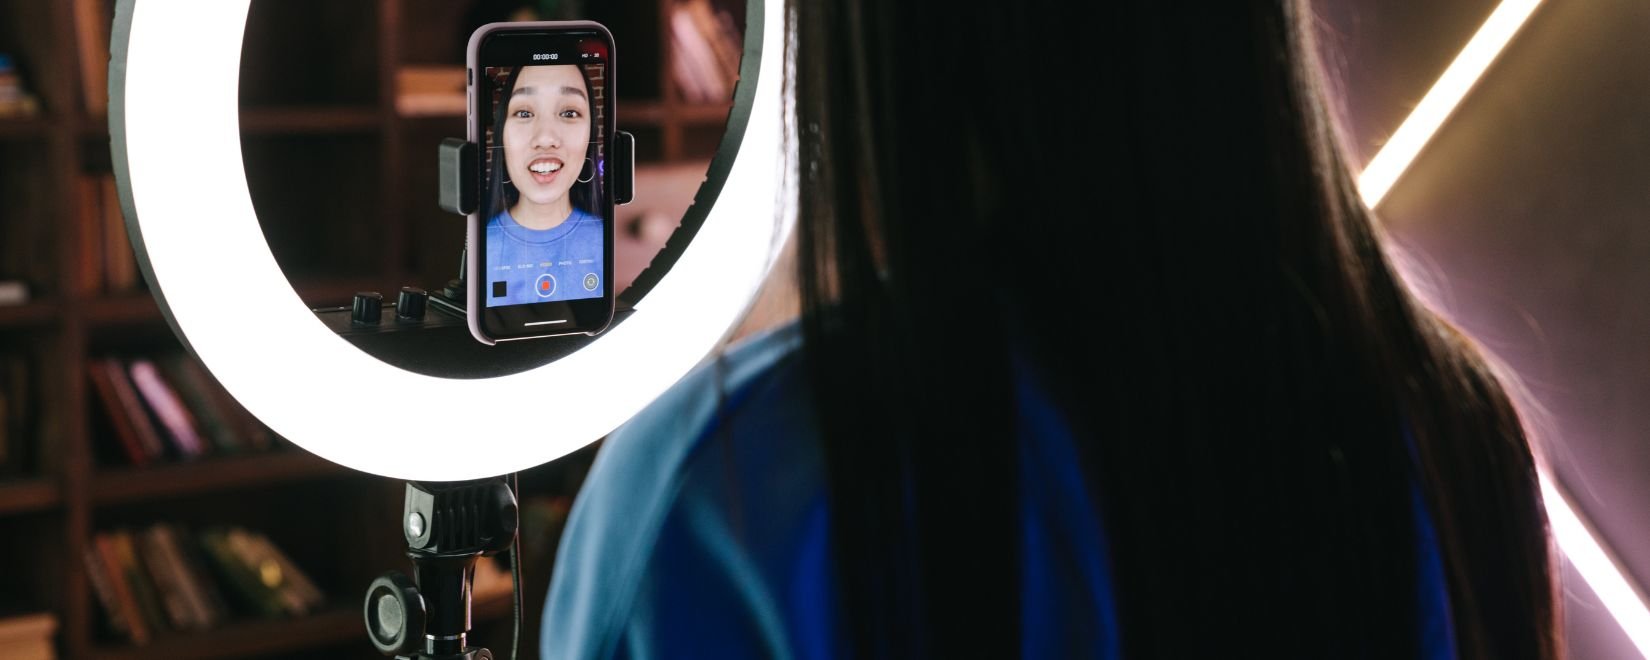 A woman in front of a ring light, recording a video on a smartphone